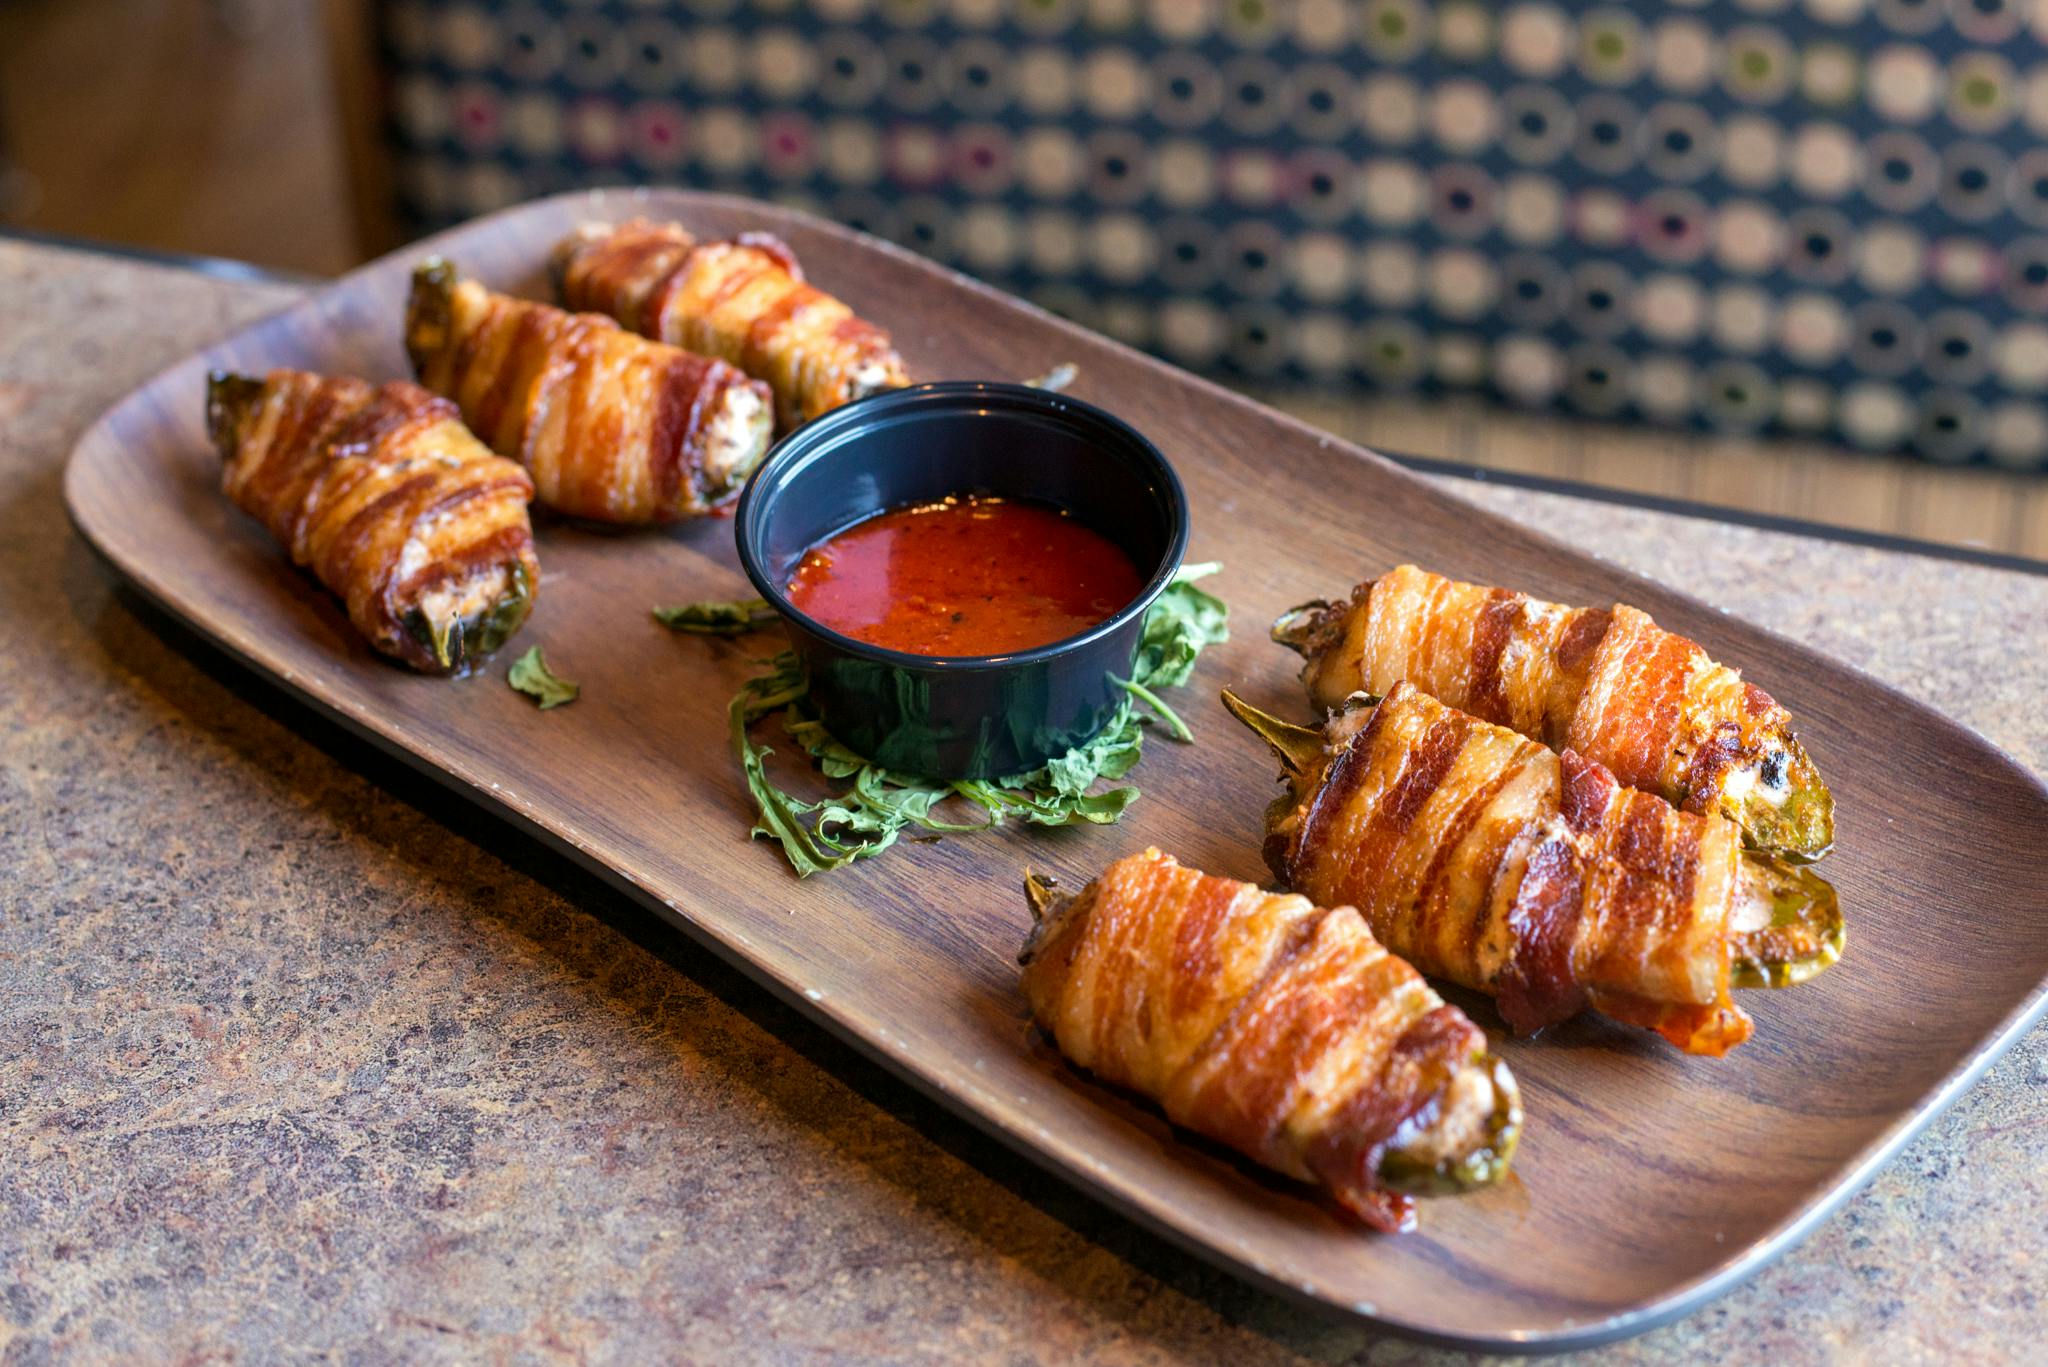 Bacon Wrapped Jalape?o Poppers from Brickhouse Craft Burgers & Brews in De Pere, WI